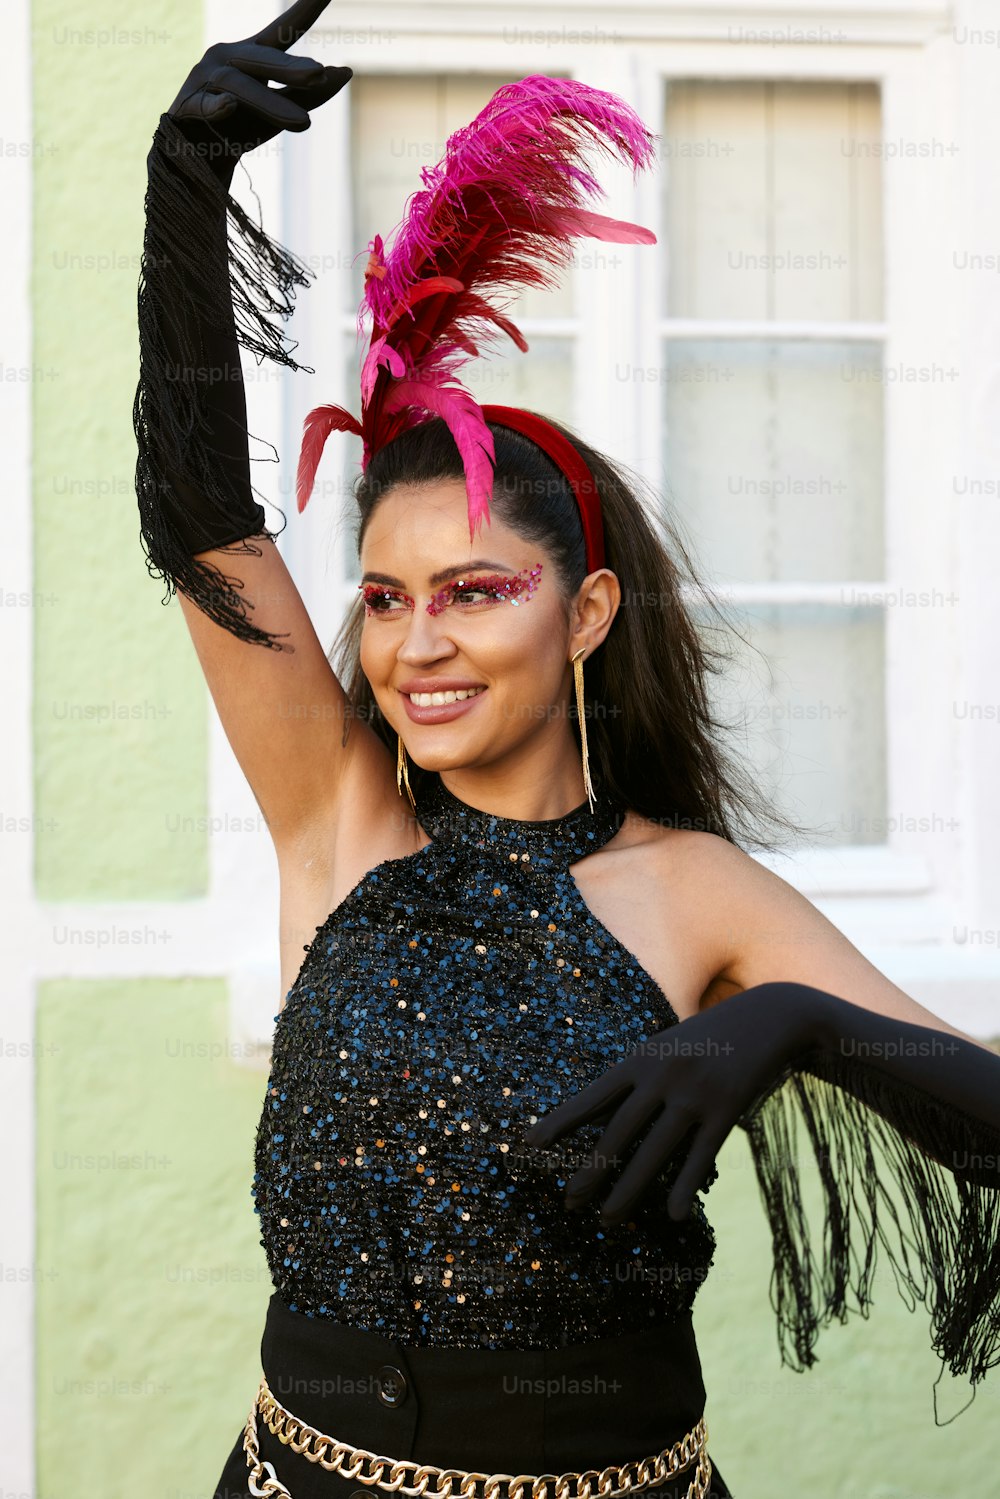 a woman wearing a black dress and a pink feathered hat